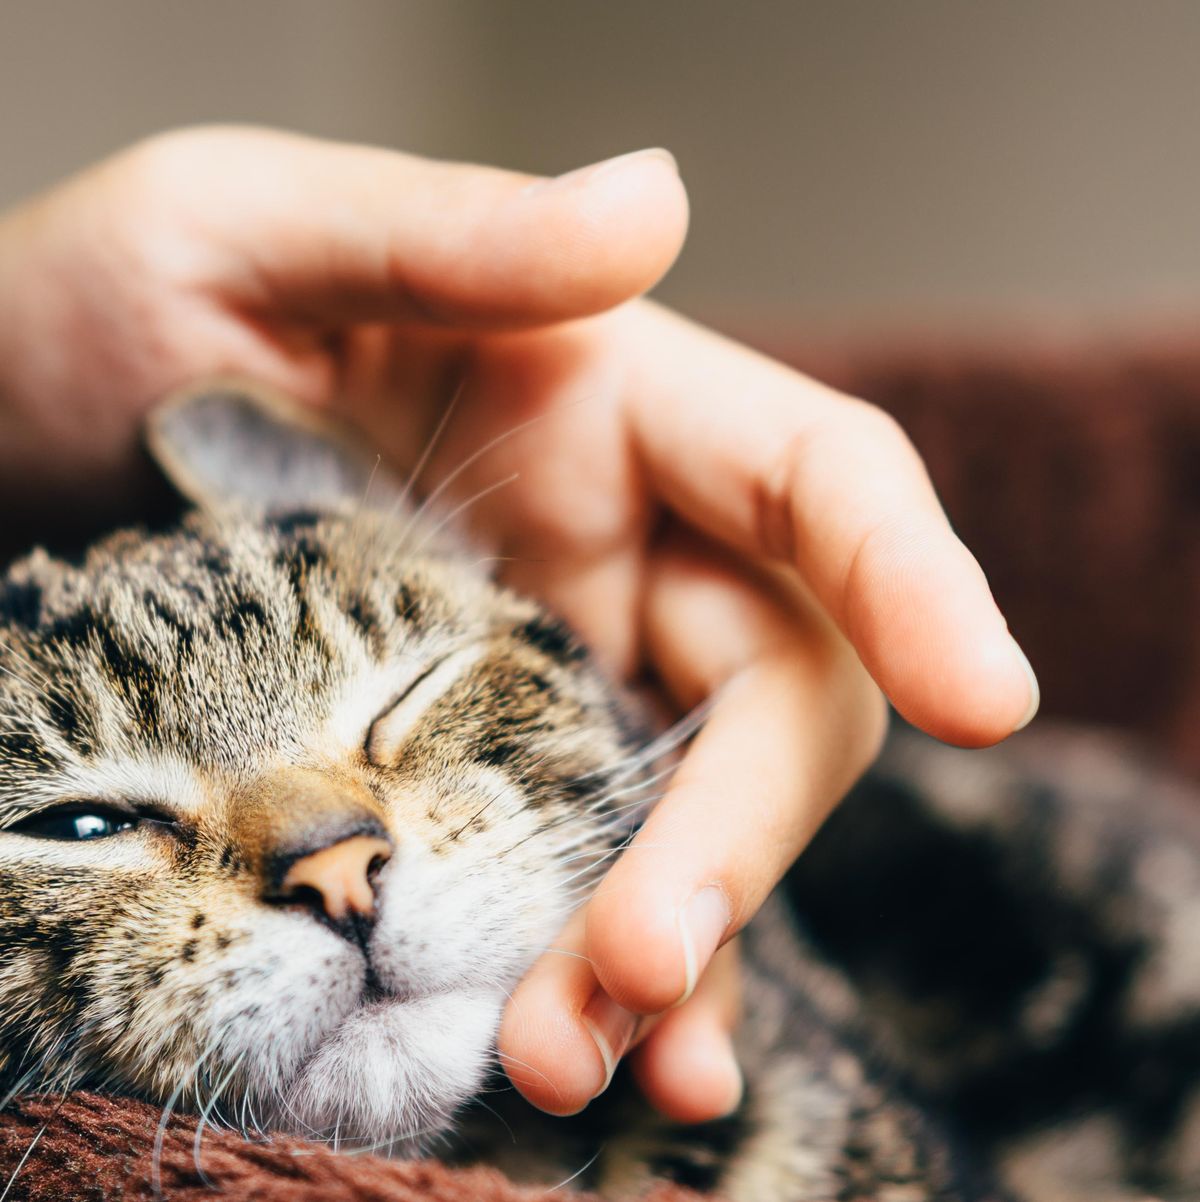 10 Reasons Why Cat Lovers Are the Best